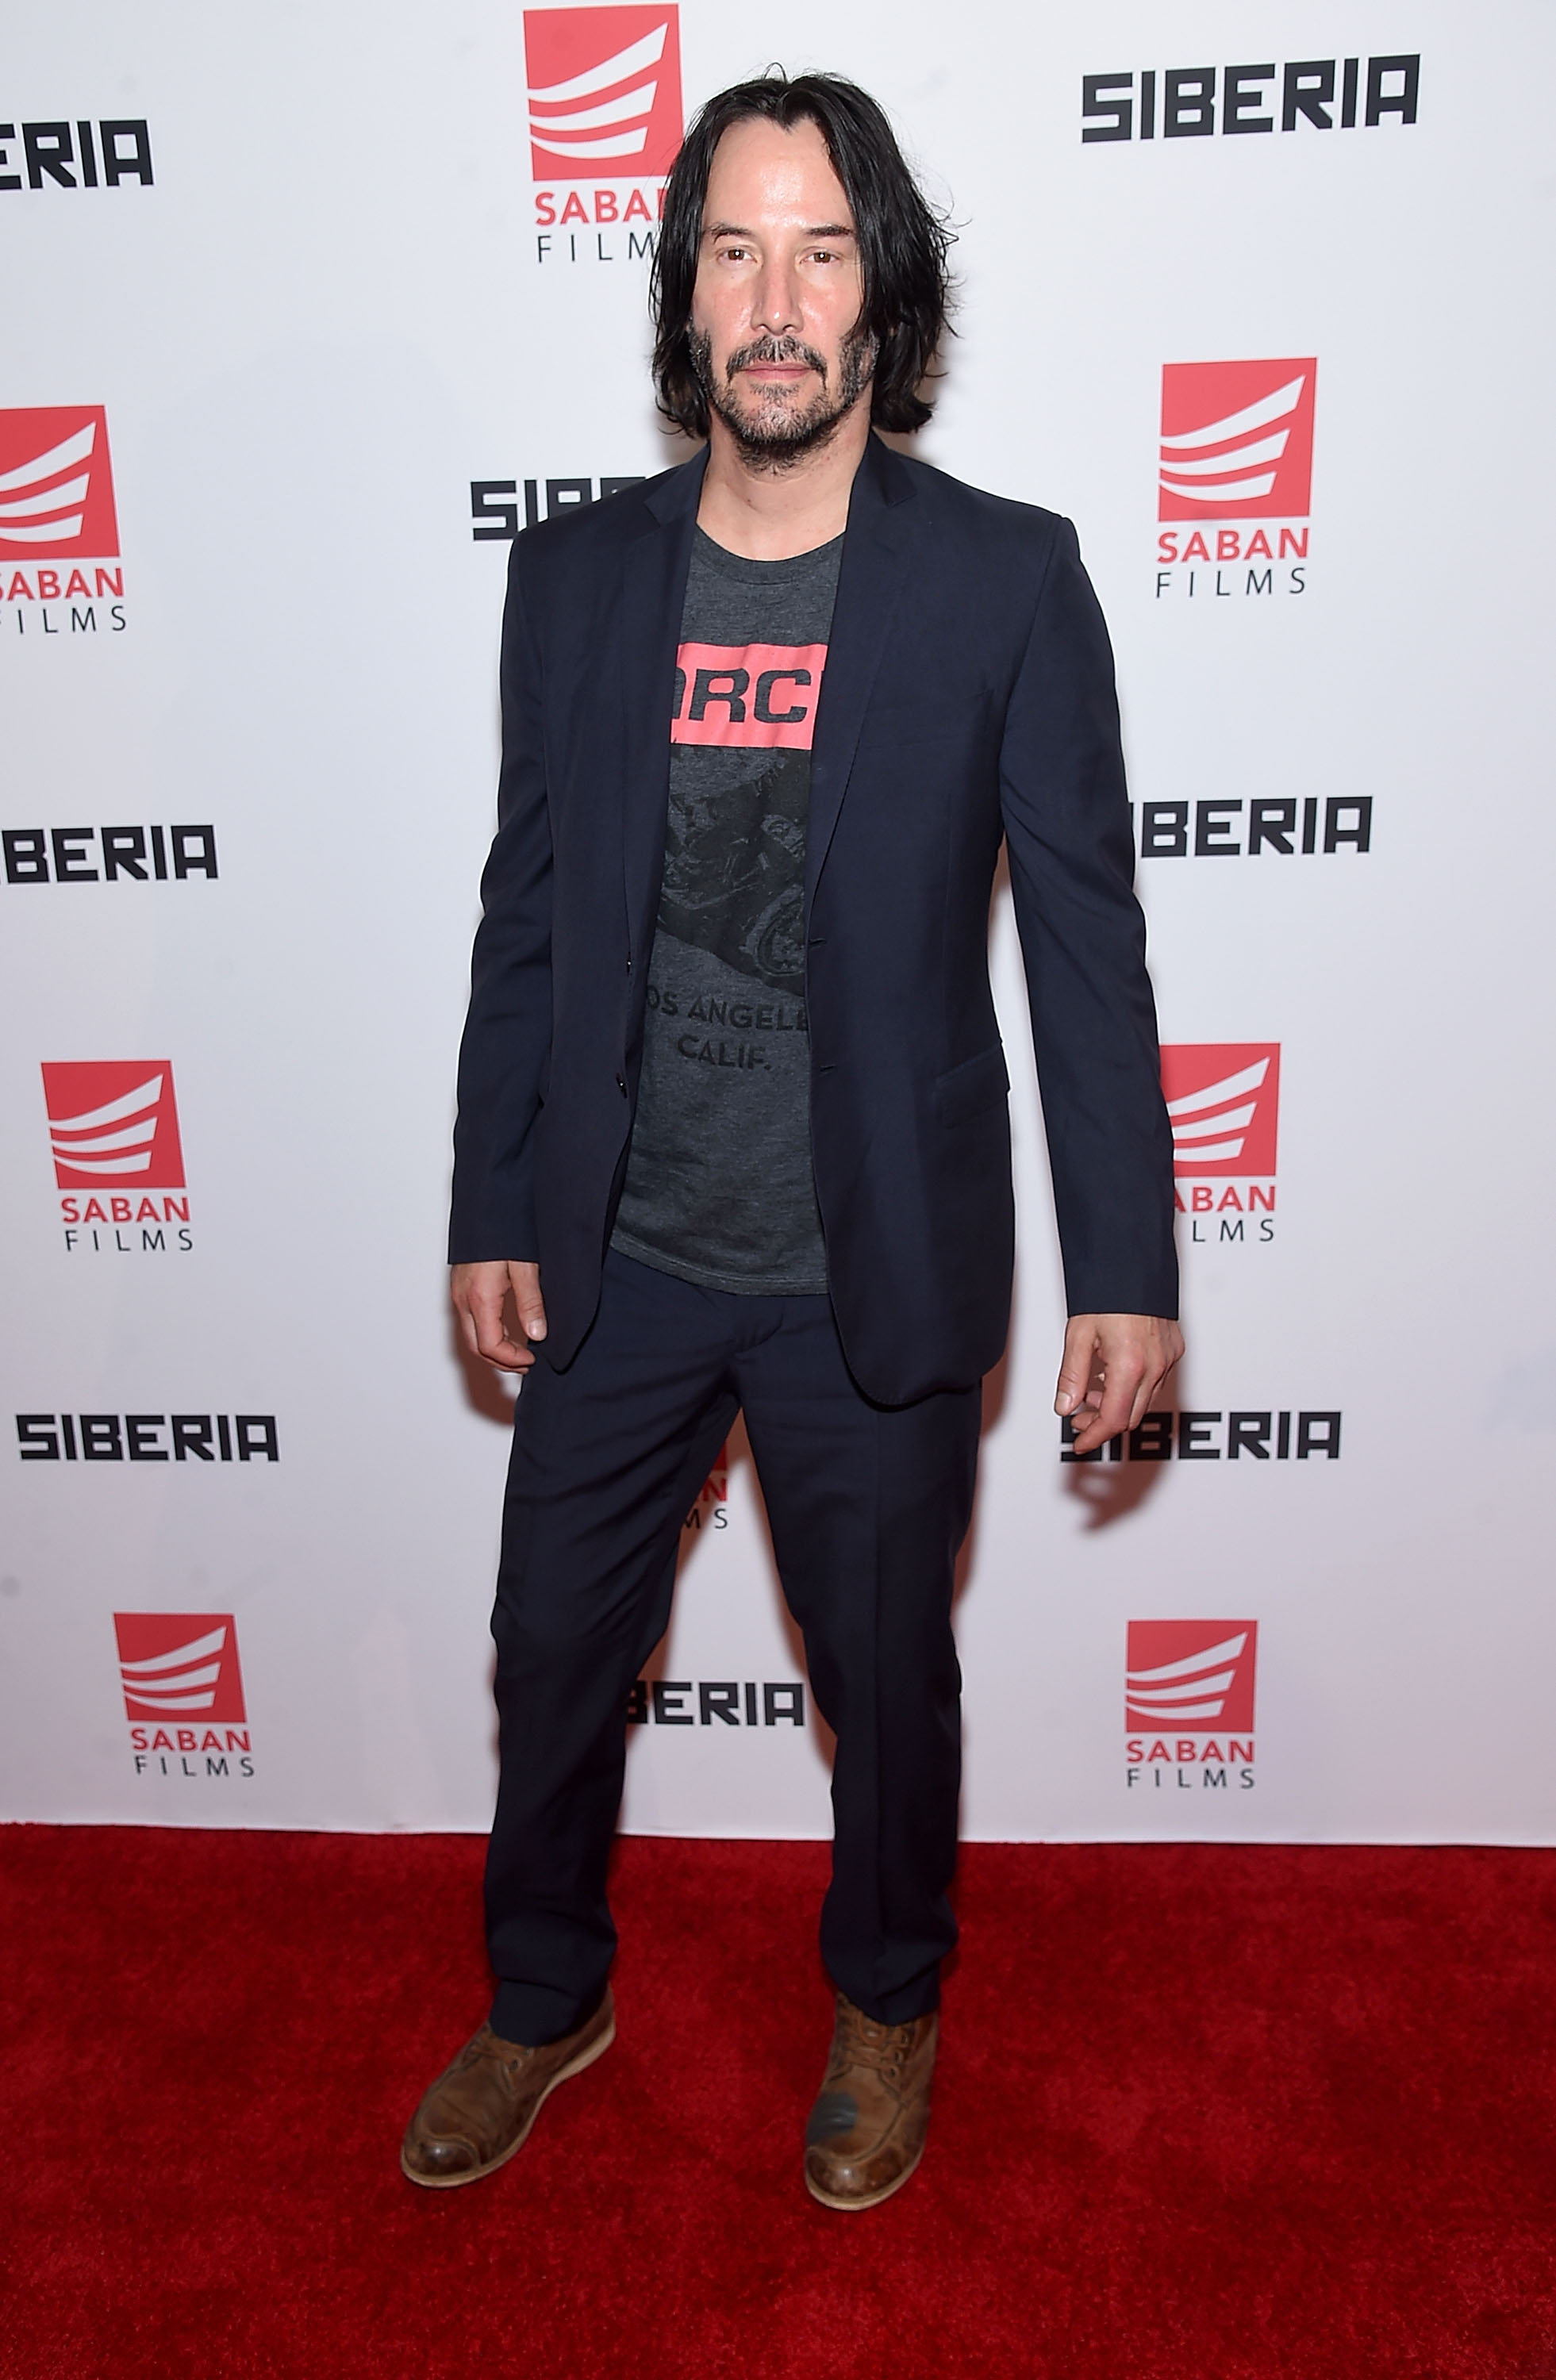 Keanu Reeves attends the"Siberia" premiere at The Metrograph in New York City, on July 11, 2018. | Source: Getty Images